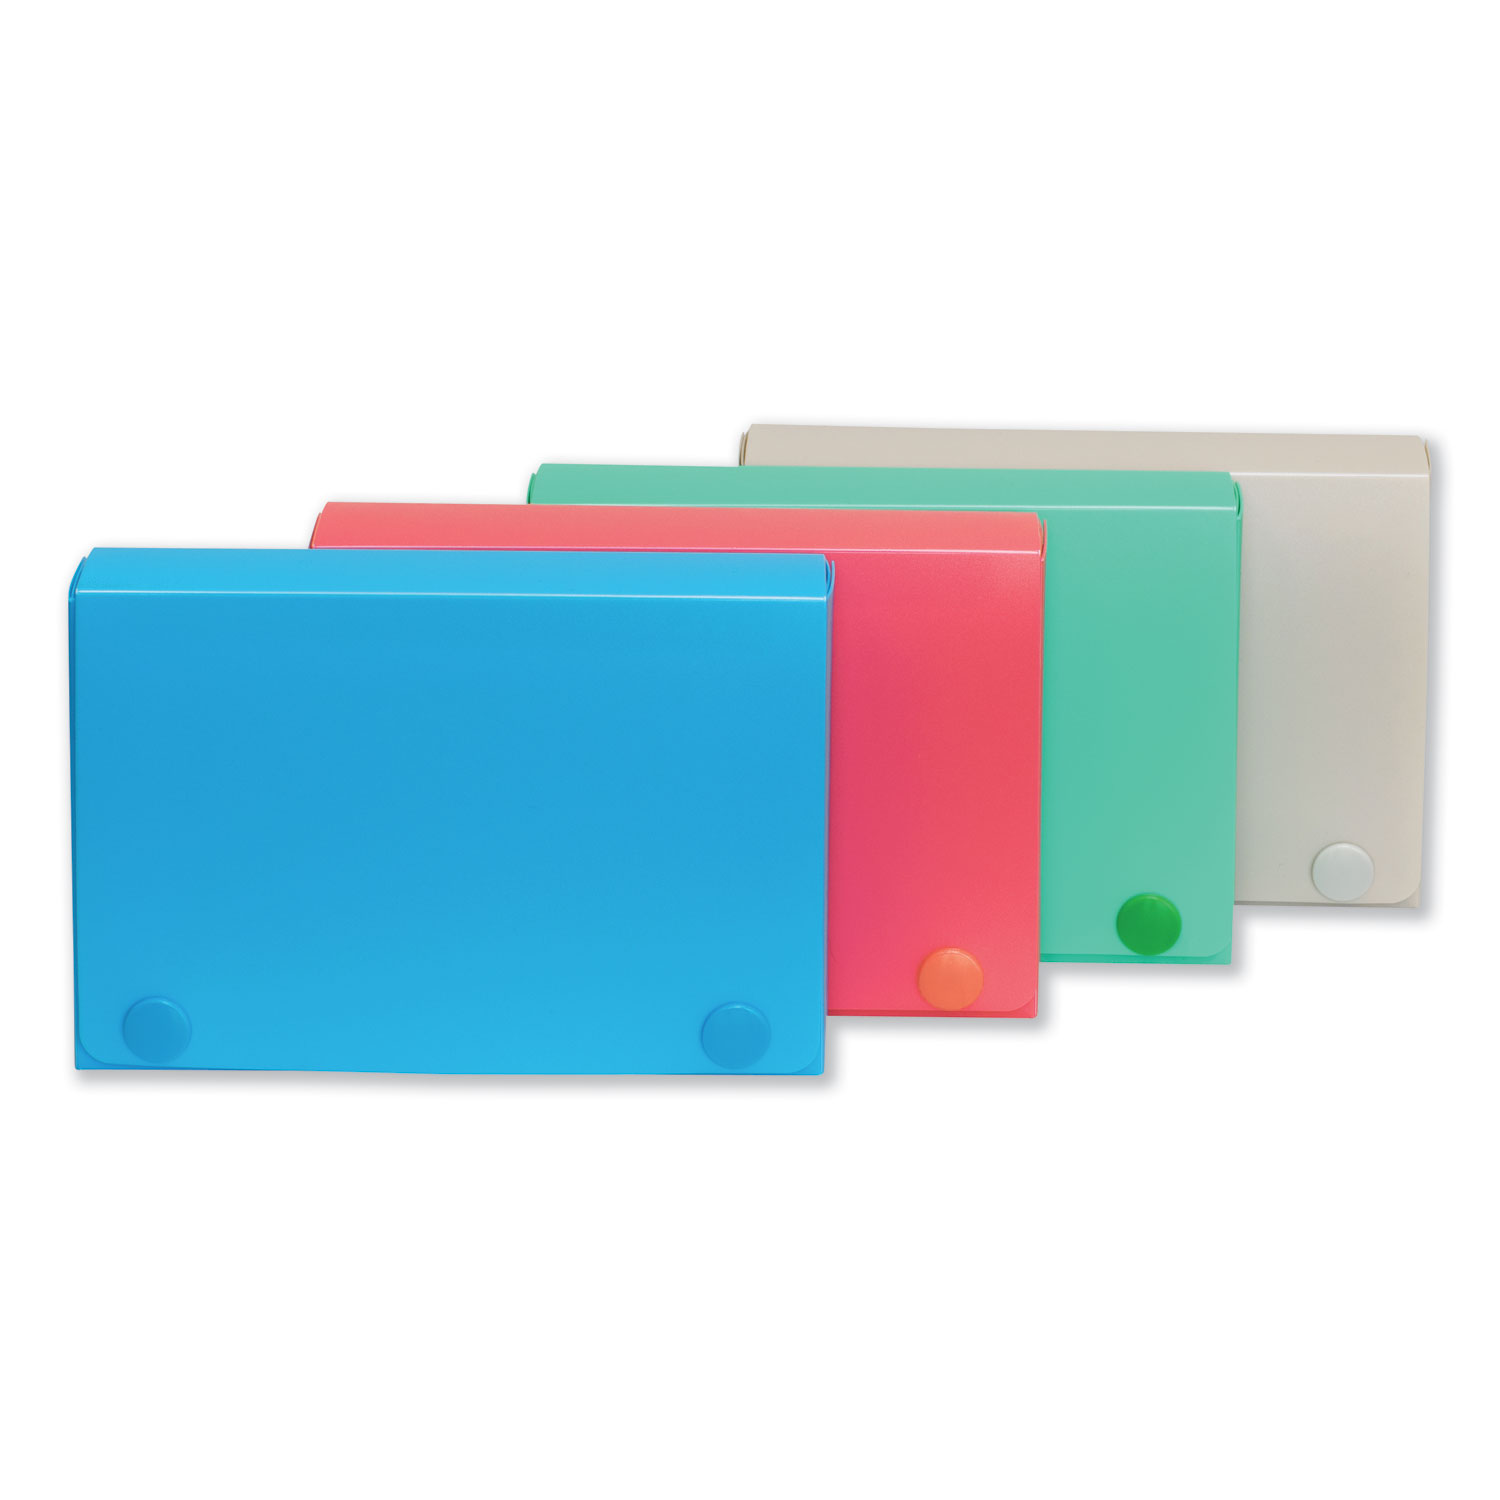  C-Line 58435 Index Card Case, Holds 100 3 x 5 Cards, Polypropylene, Assorted Colors (CLI58435) 